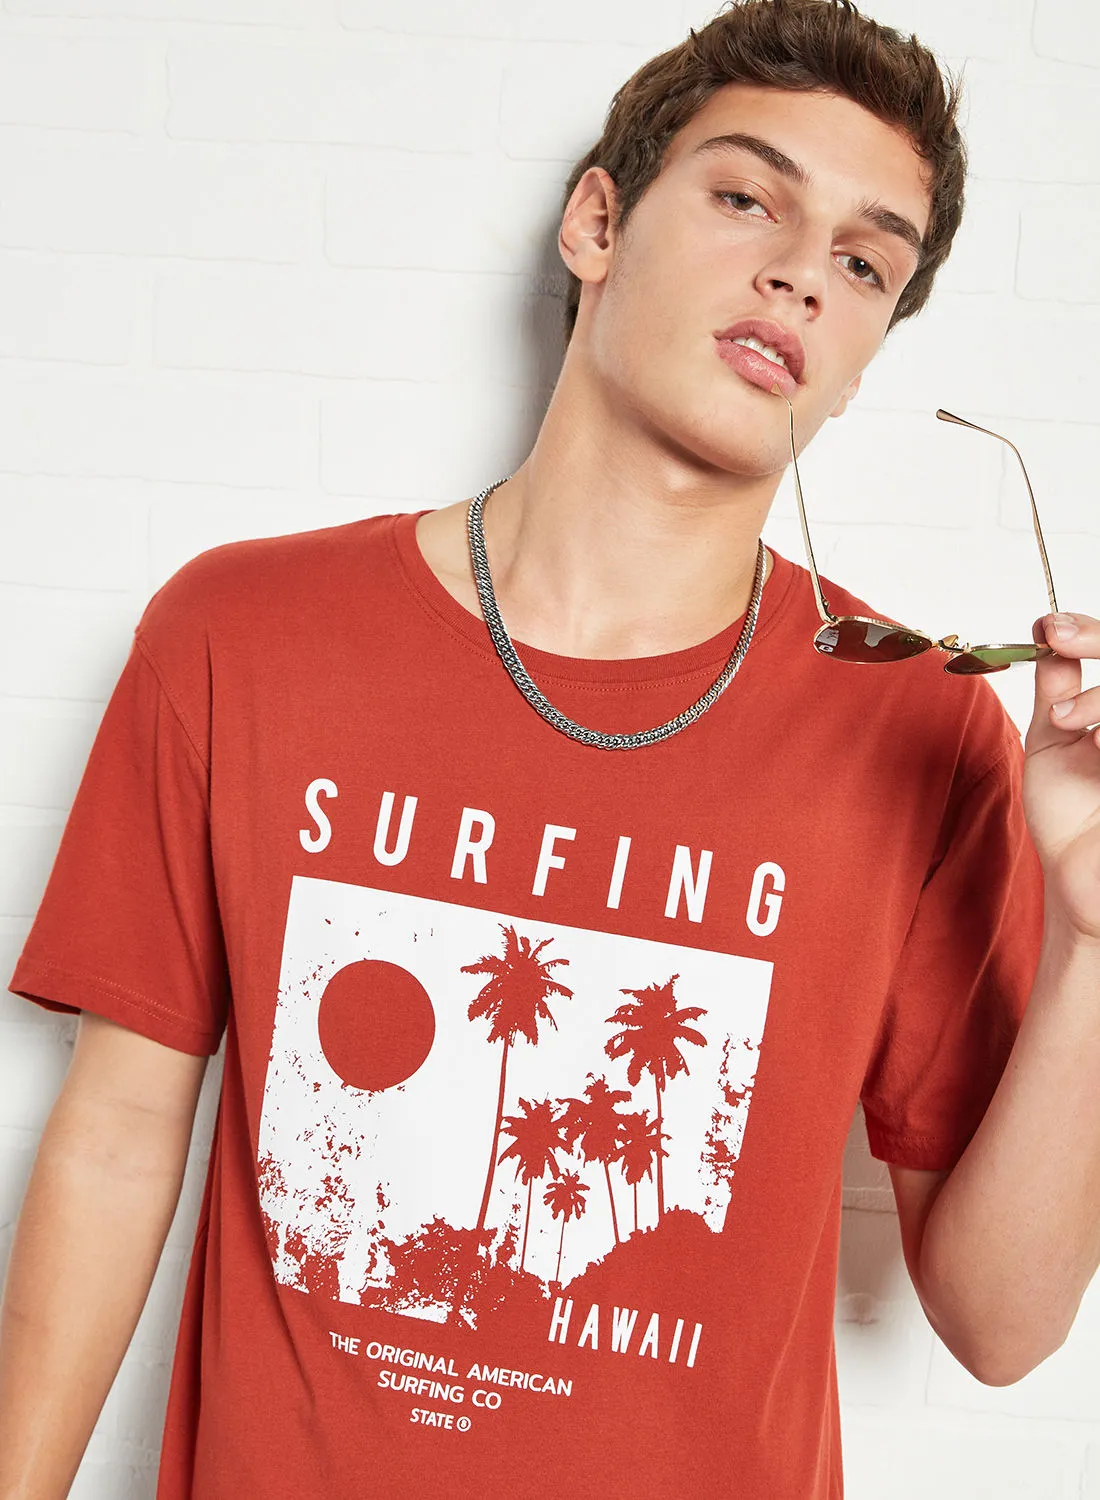 STATE 8 Surfing Graphic Print T-Shirt Red/Brown